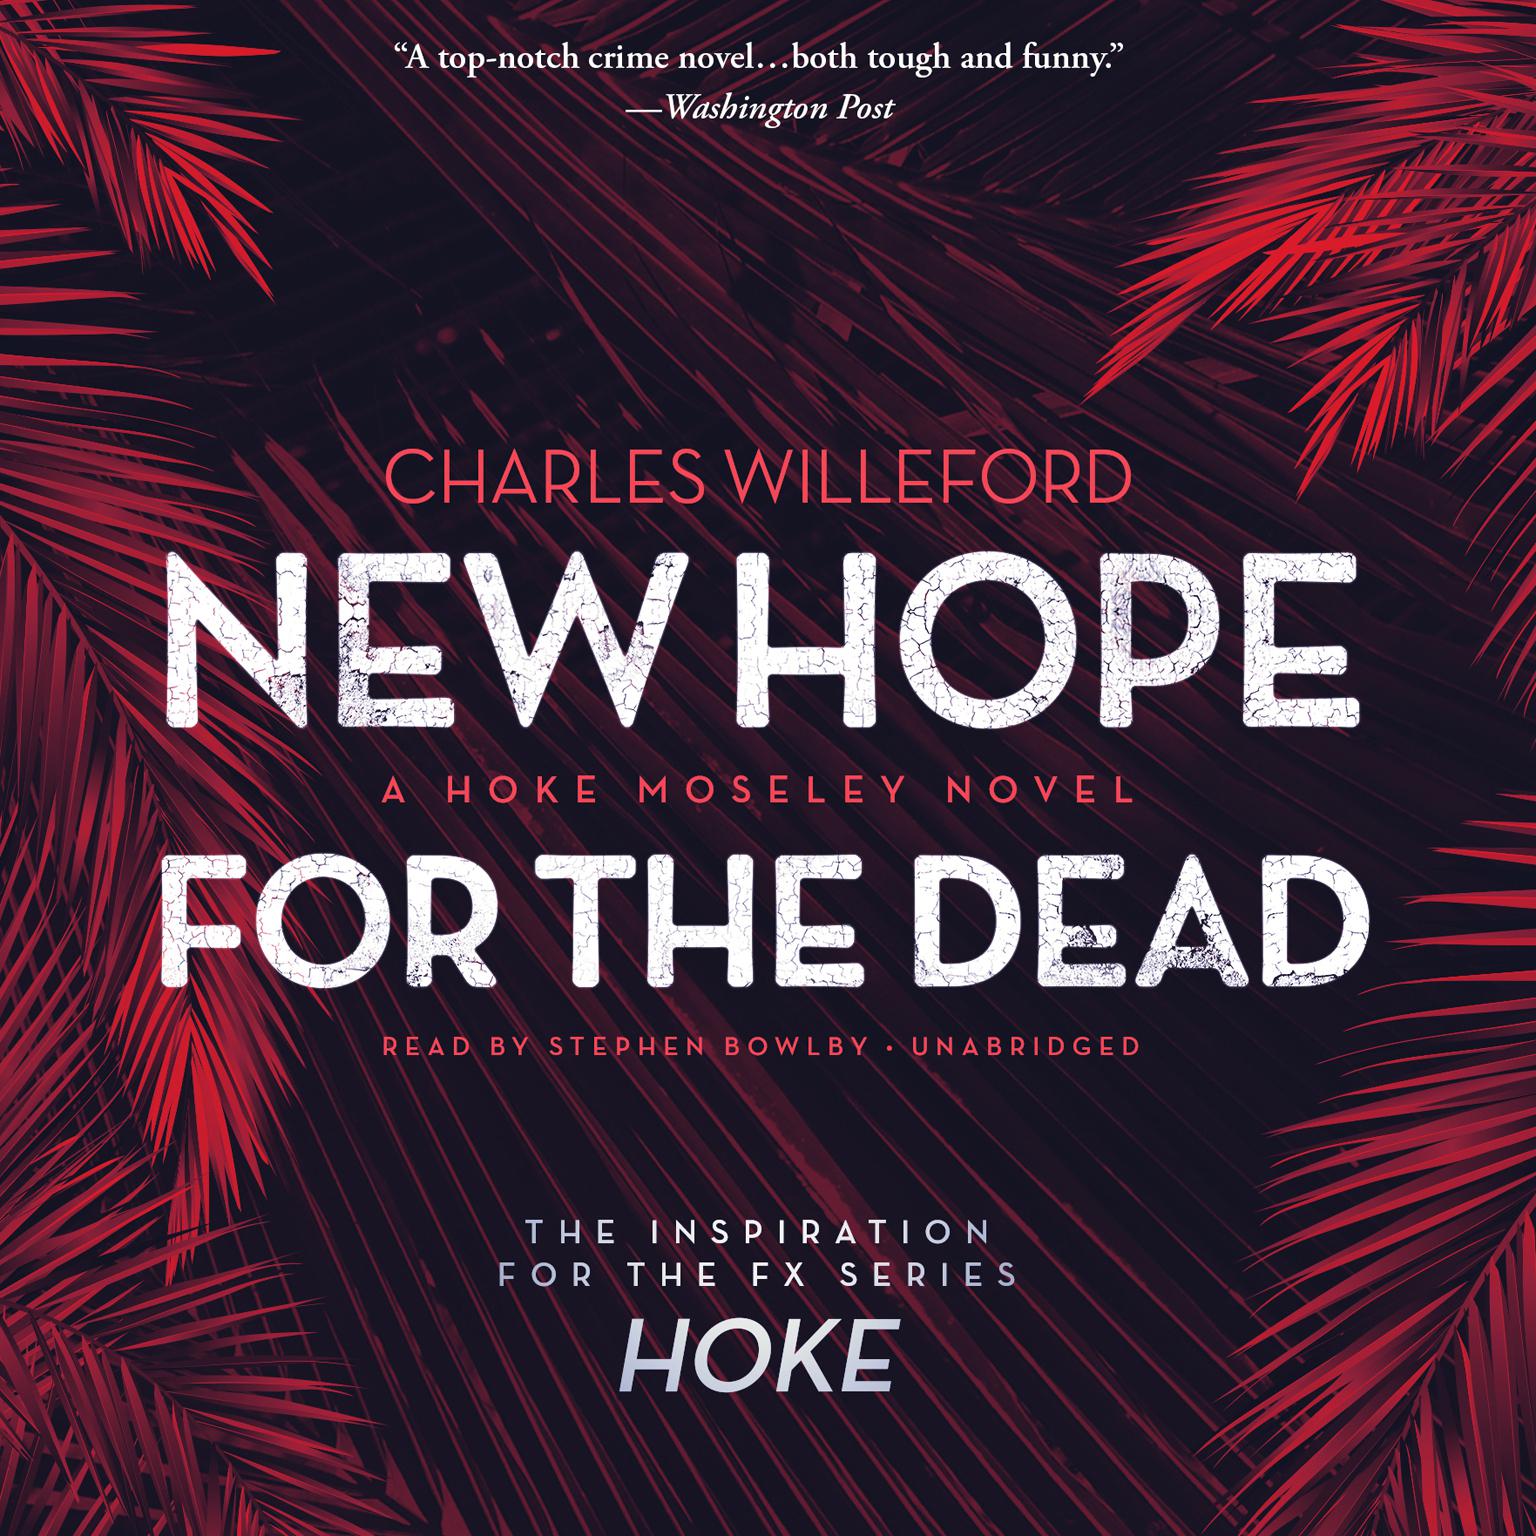 New Hope for the Dead: A Novel Audiobook, by Charles Willeford